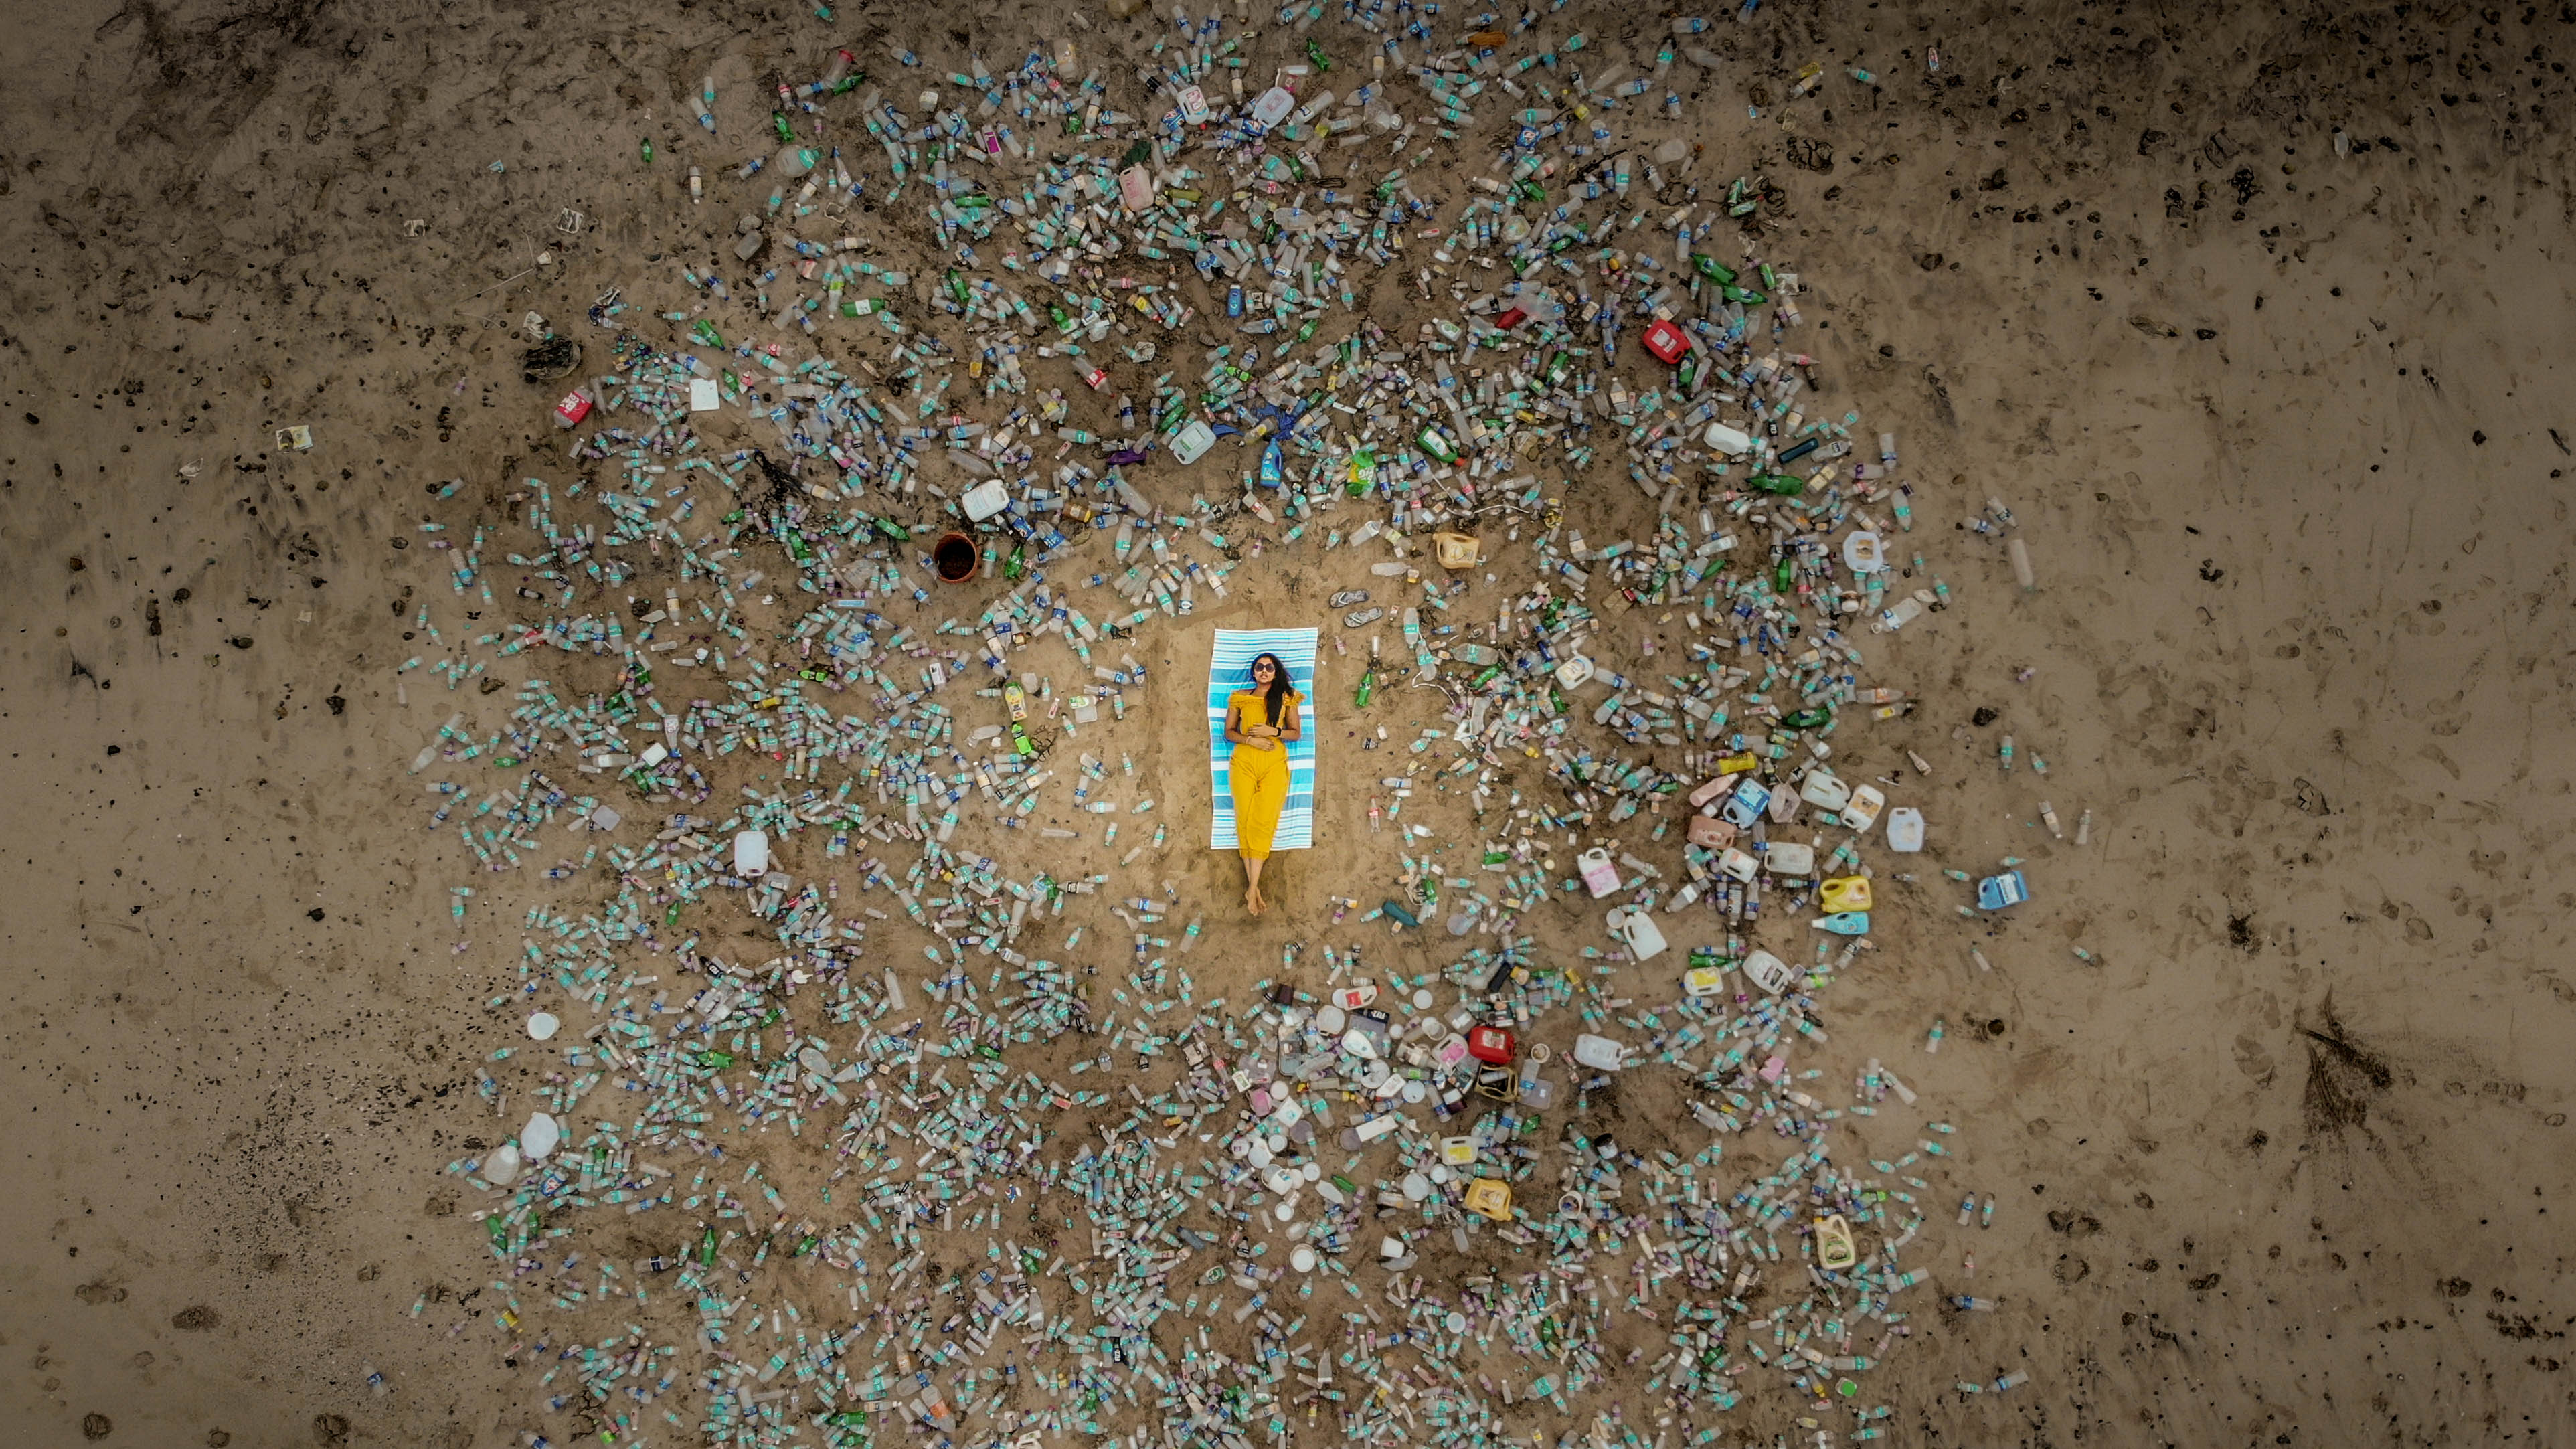 A person reclines on a chair on a beach surrounded by plastic bottles